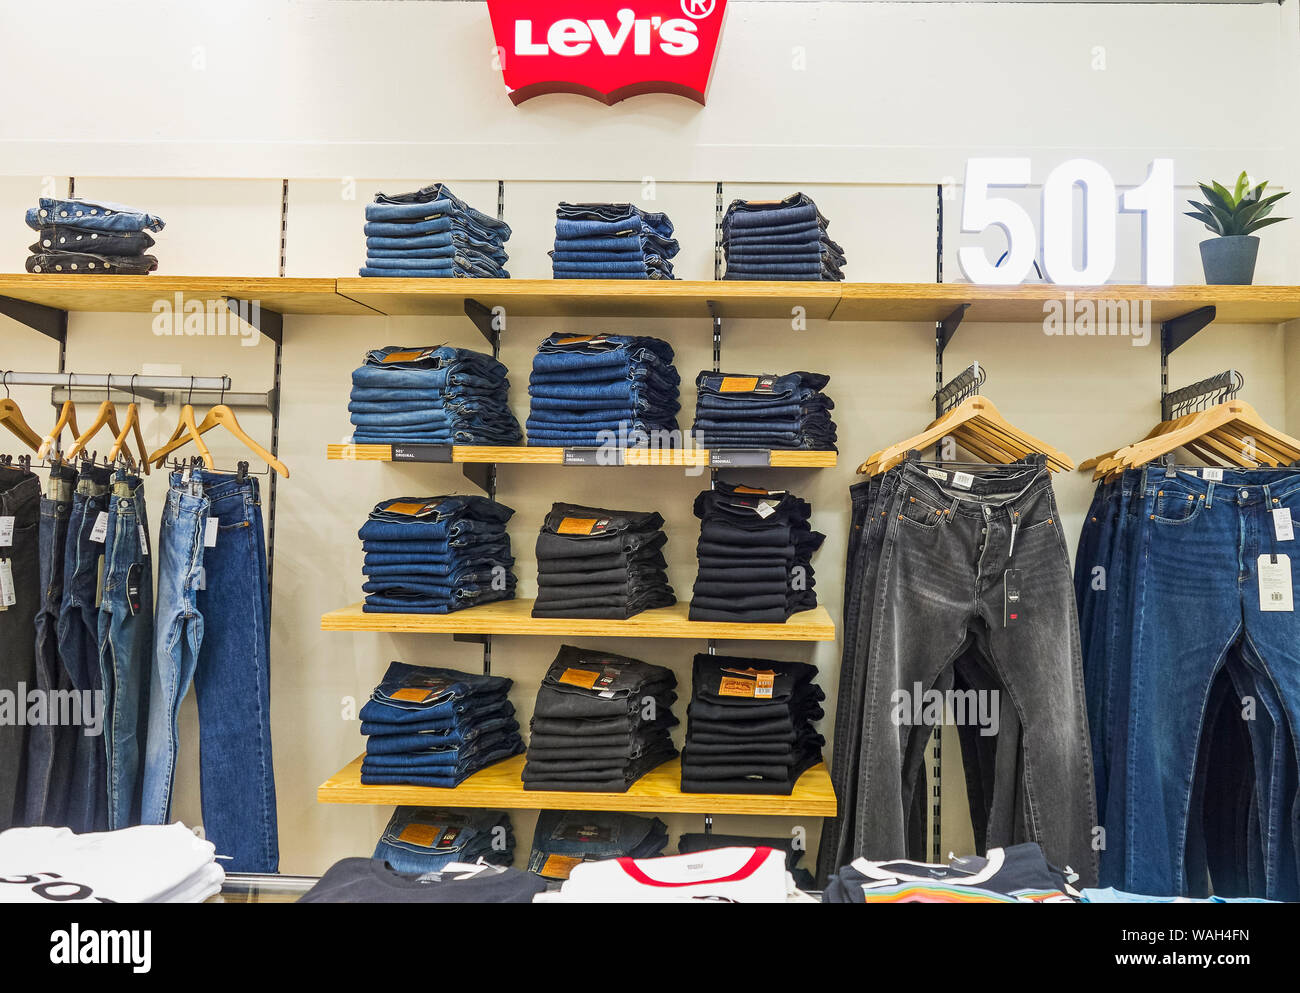 Levi Strauss \u0026 Co clothing products on 